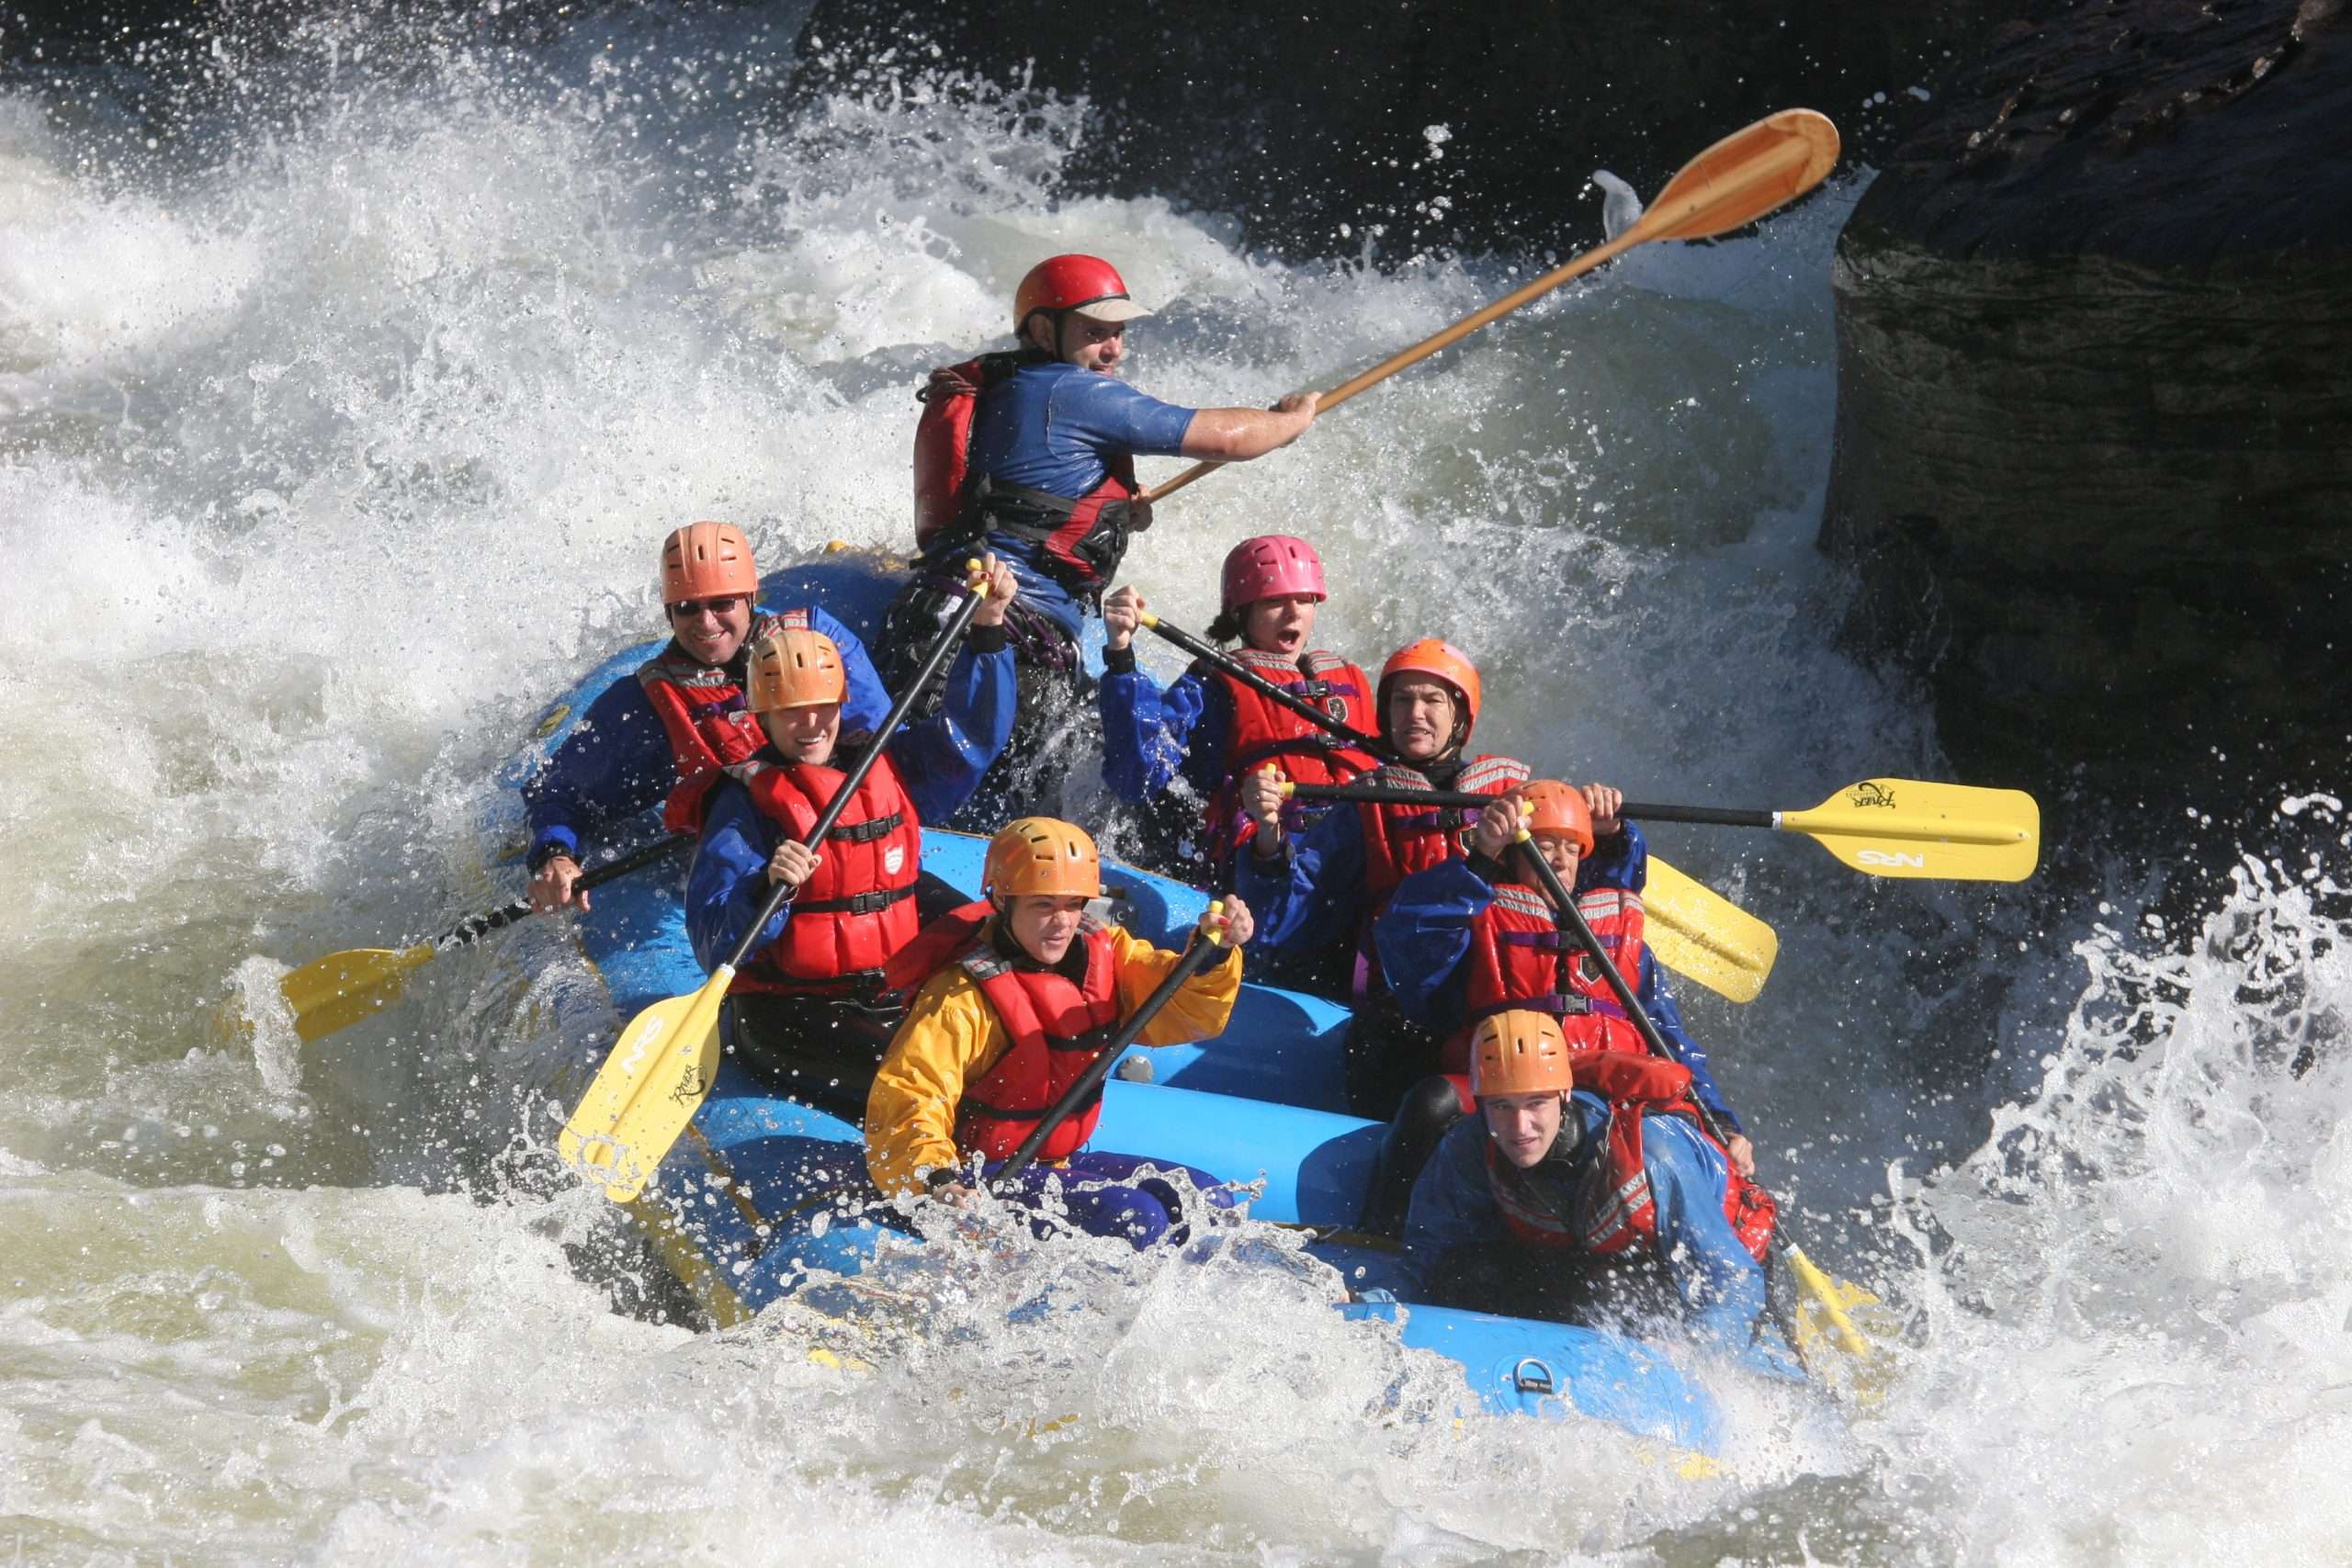 Rafting on the Gauley River